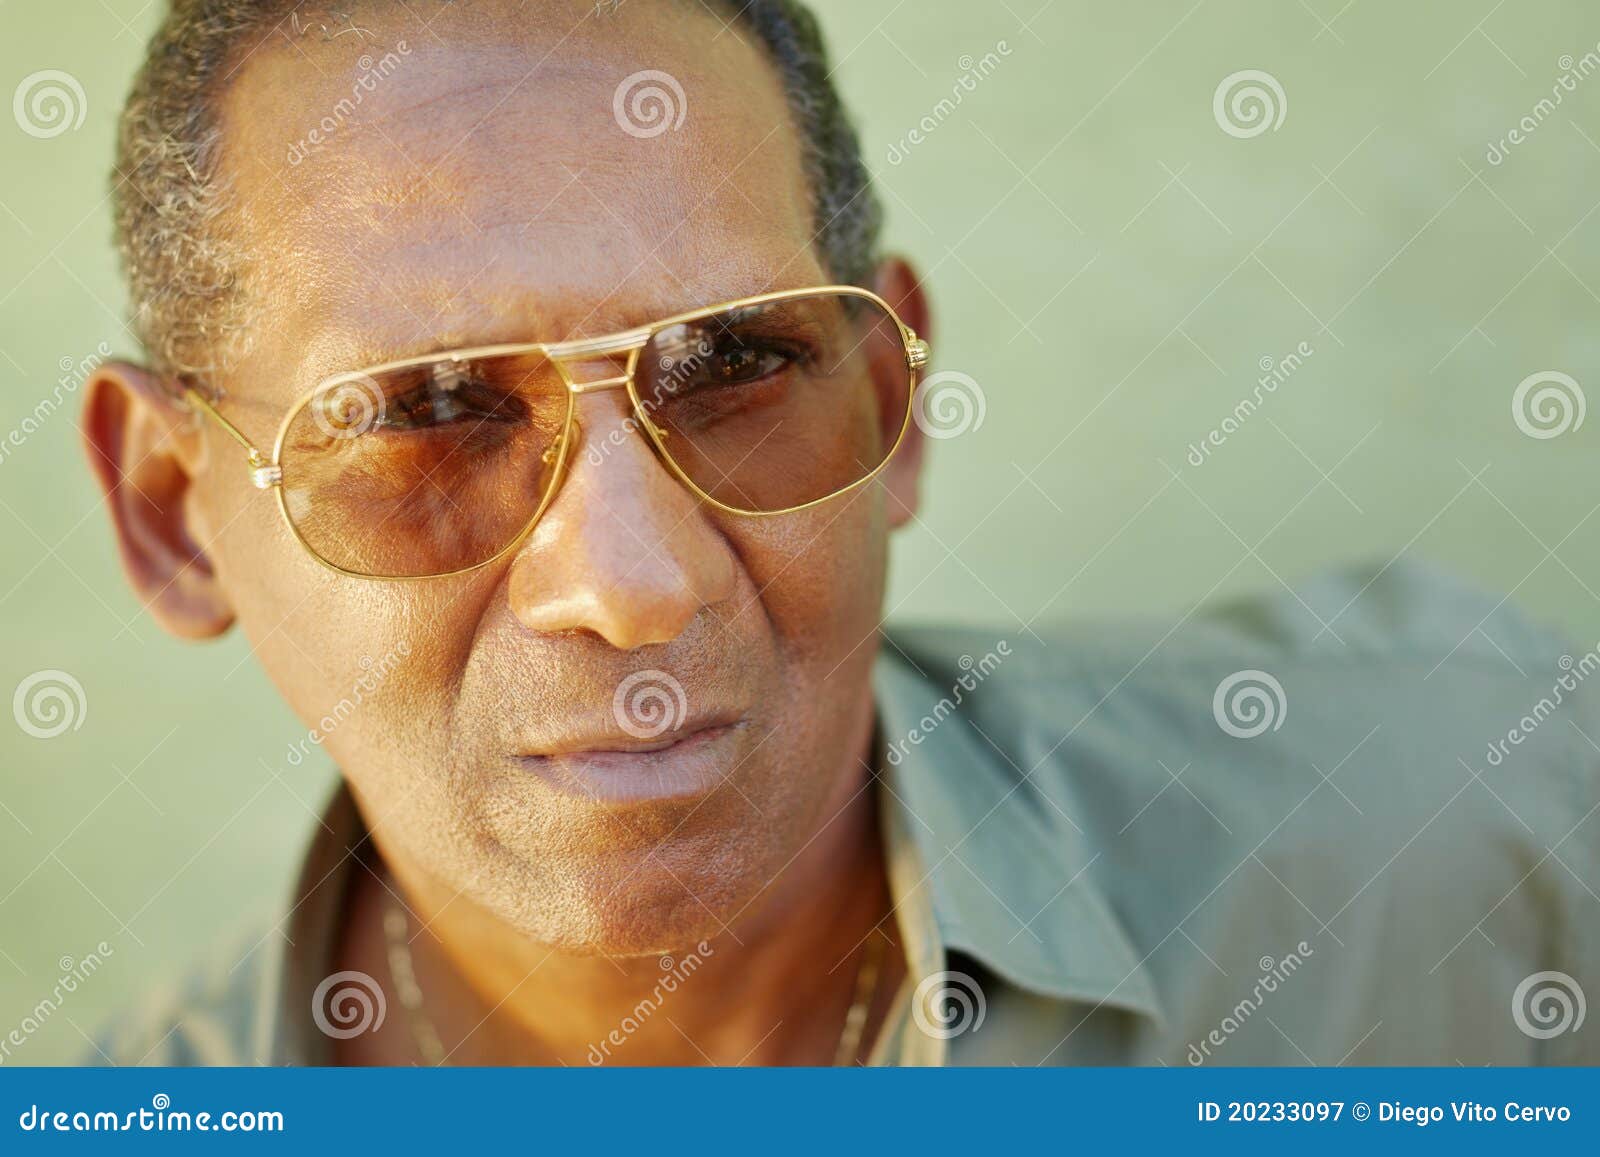 14,600+ Man Sunglasses Close Up Stock Photos, Pictures & Royalty